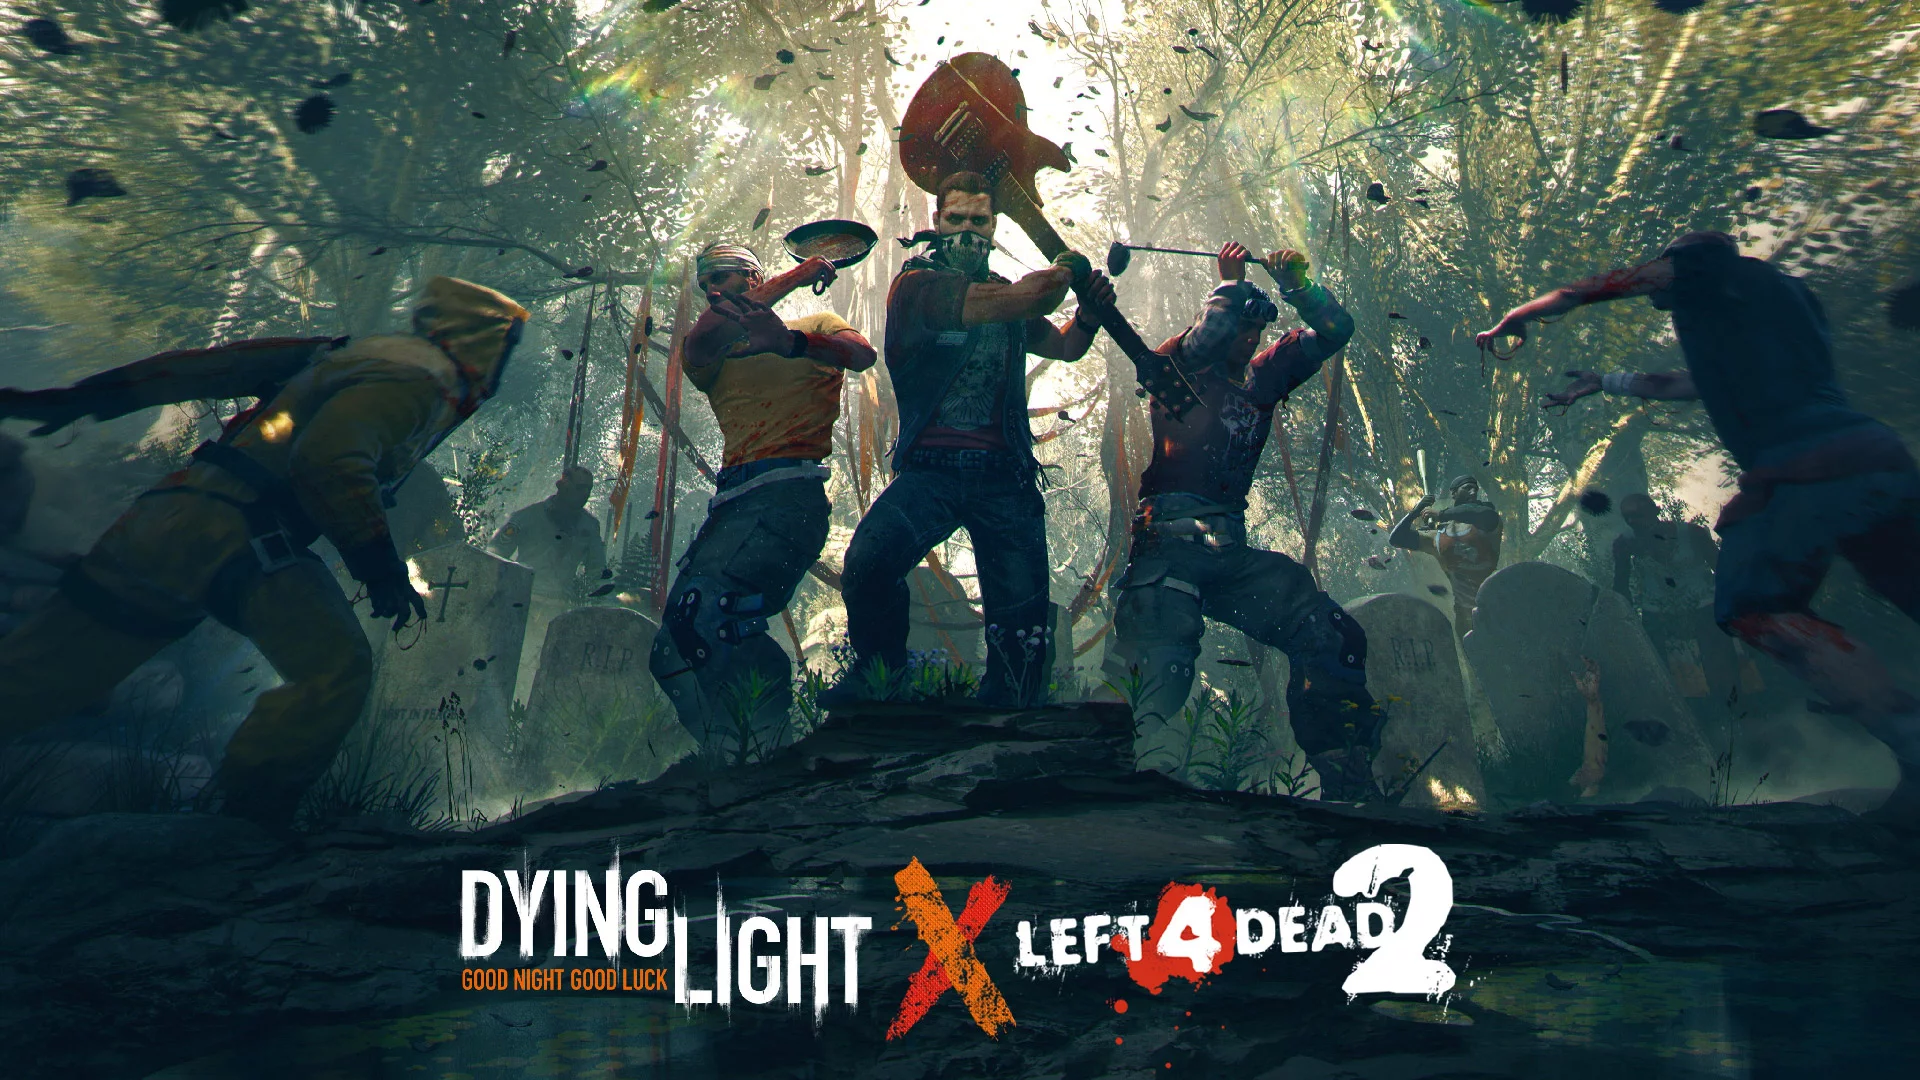 Dying Light and Left 4 Dead 2 are crossing over in a new collaboration